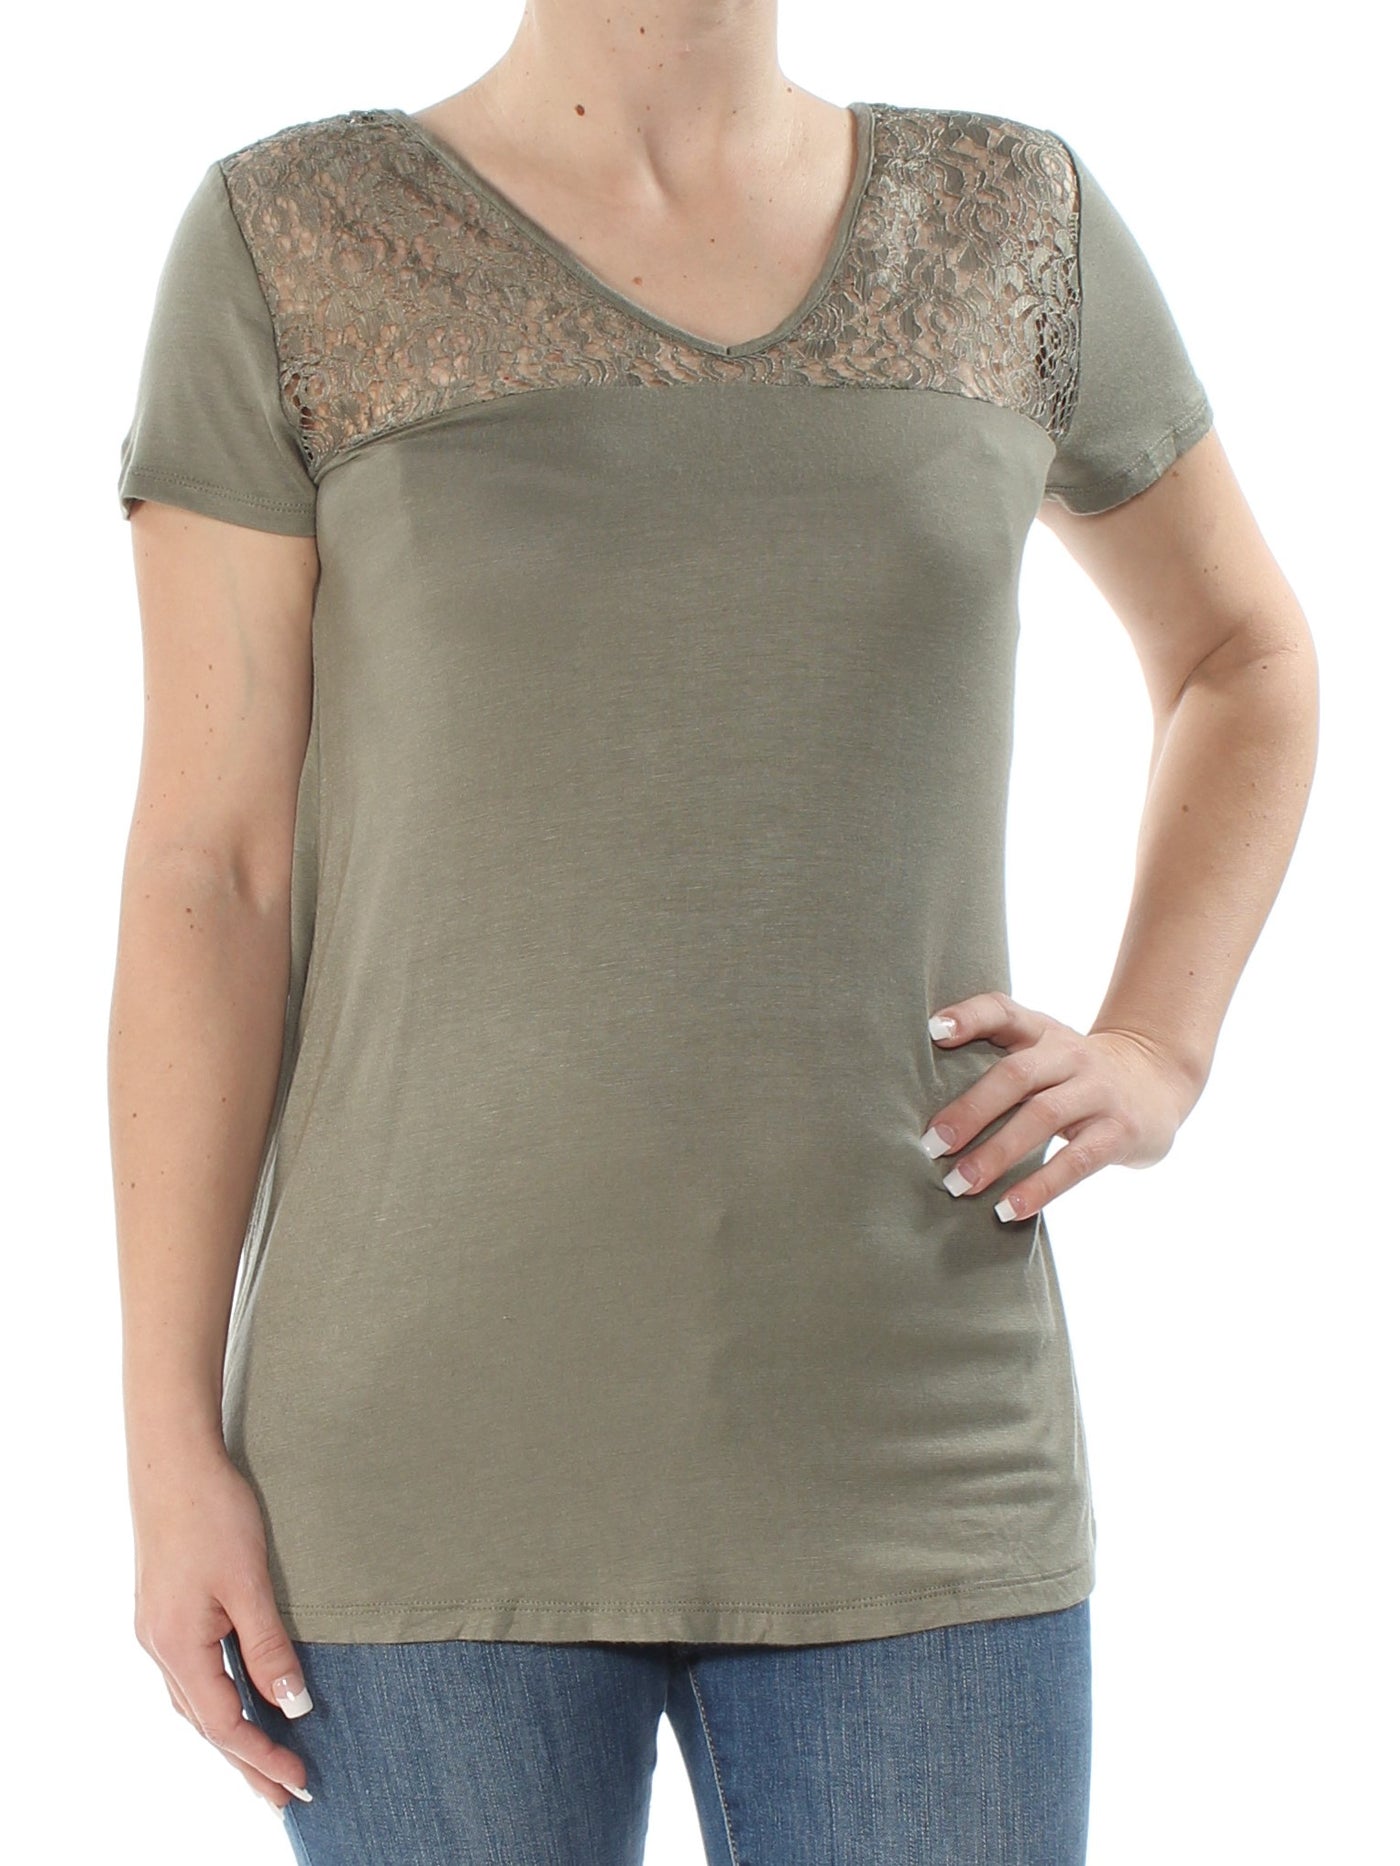 VINCE CAMUTO Womens Green Lace Floral Short Sleeve V Neck Top